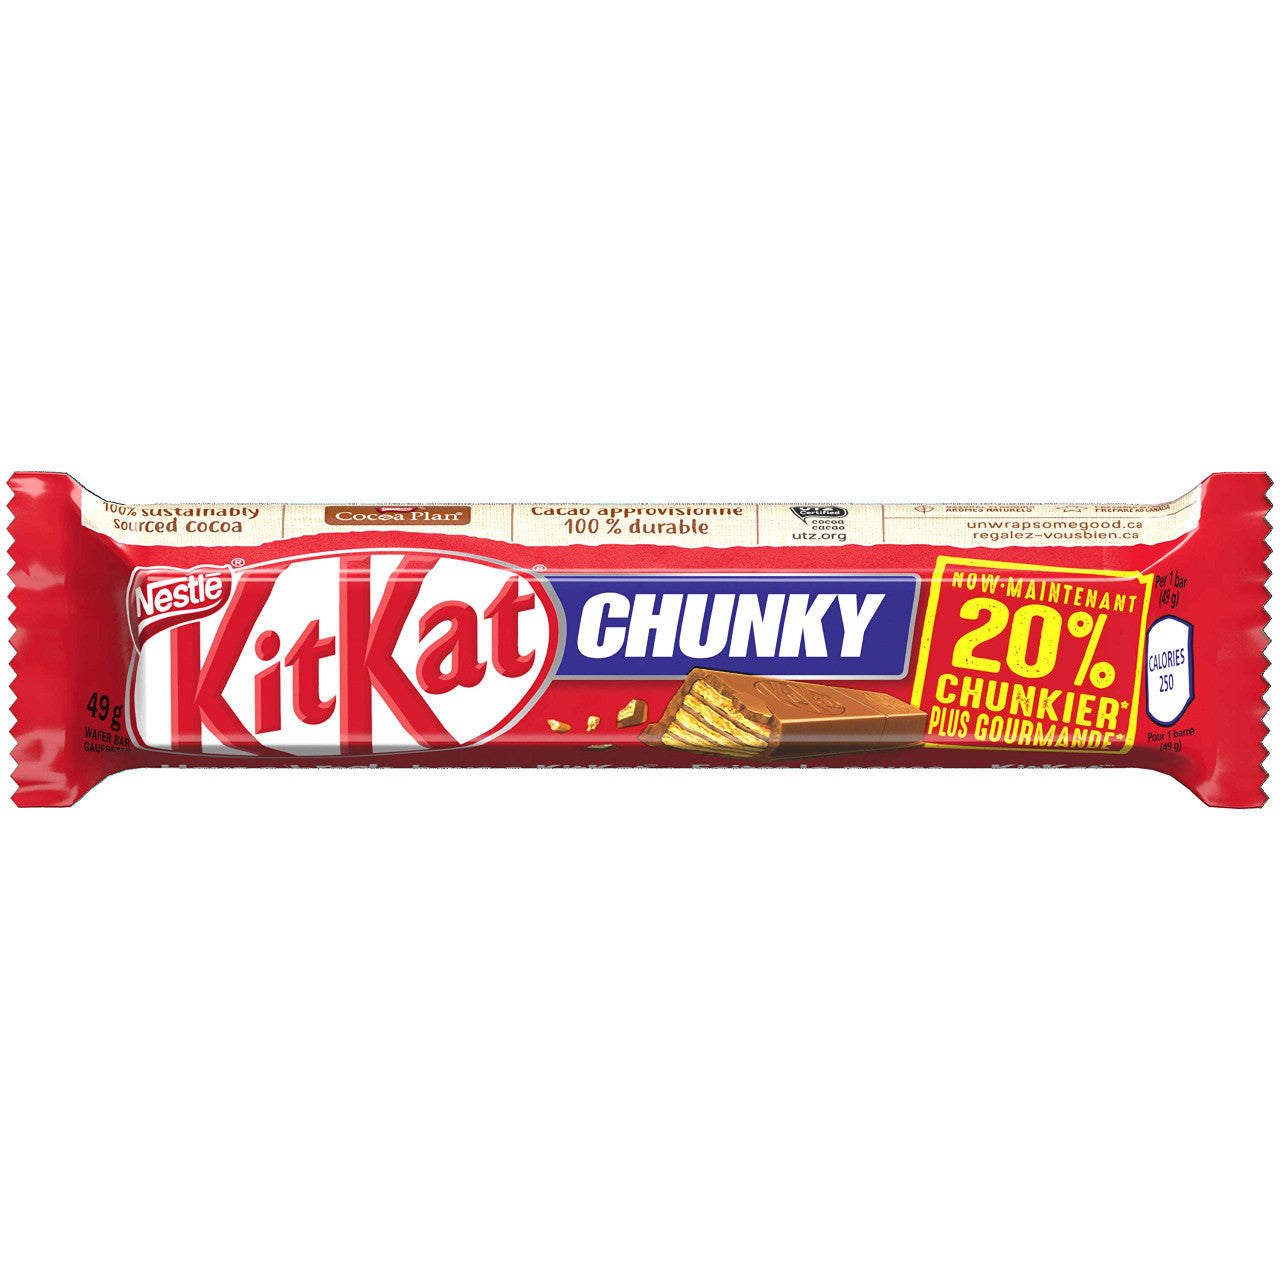 Nestle Kitkat Chunky Chocolate Bars Multipack, 4 X 49g, 196g/6.9 oz., {Imported from Canada}